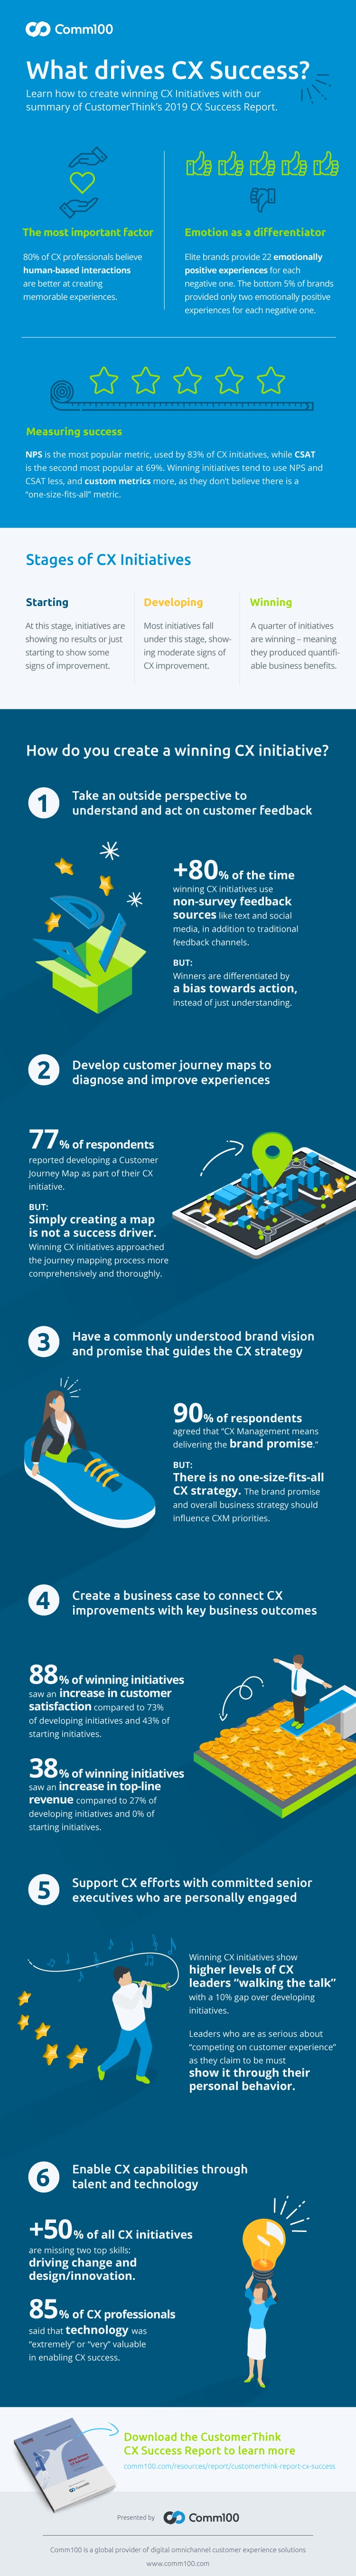 Infographic: What Drives CX Success? | Comm100 Resources